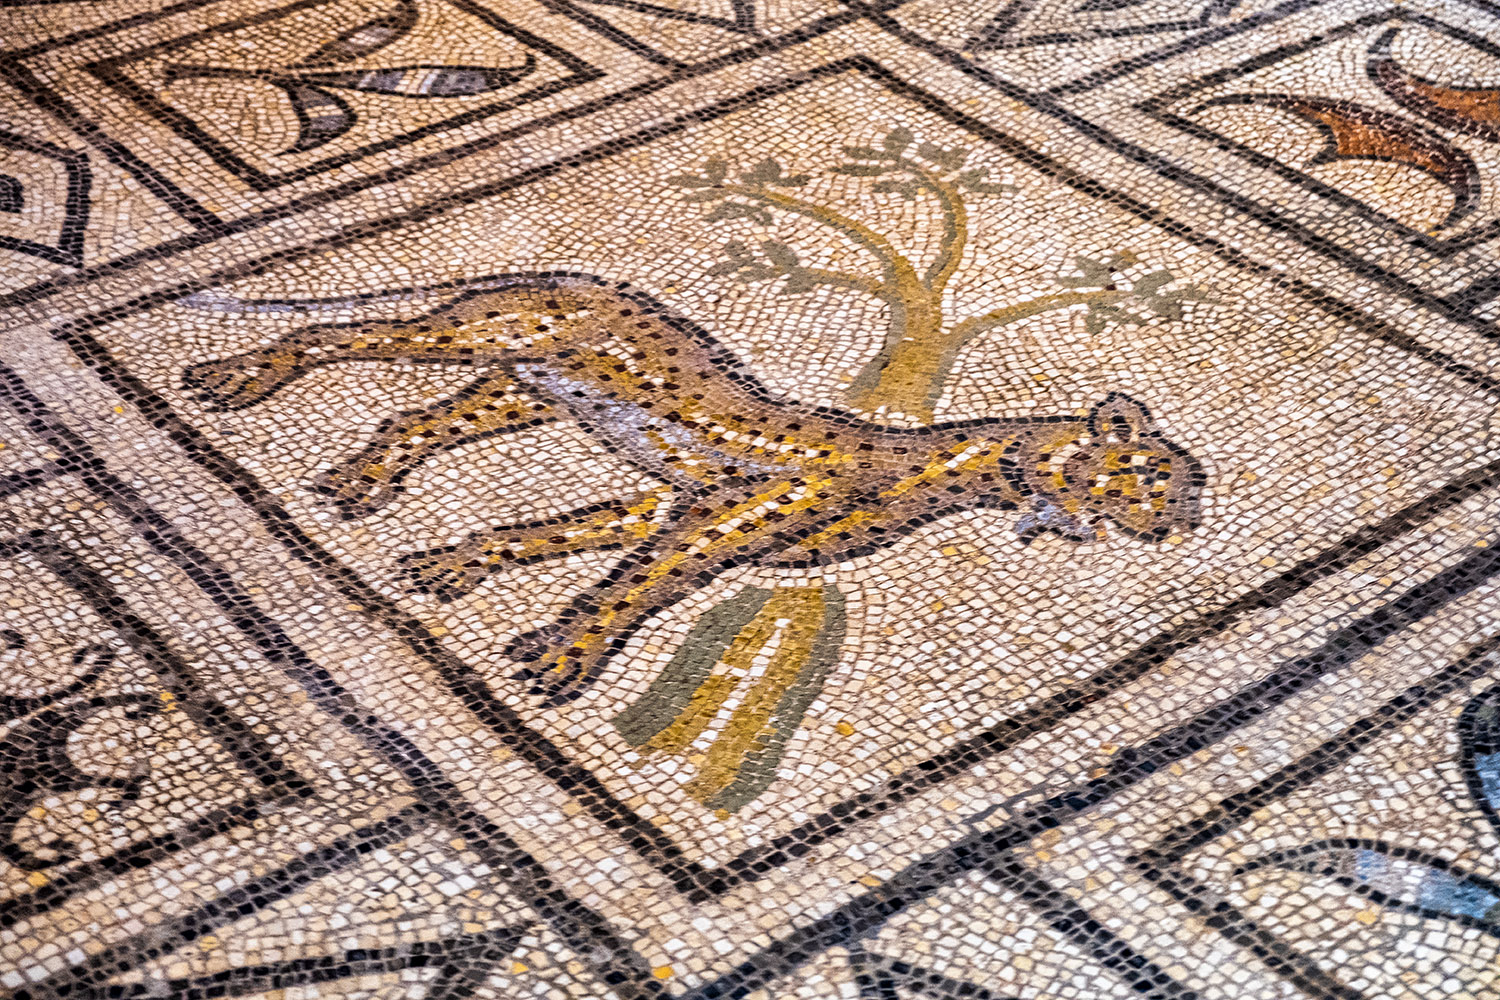 The panther mosaic in the archeological museum dates from the third century